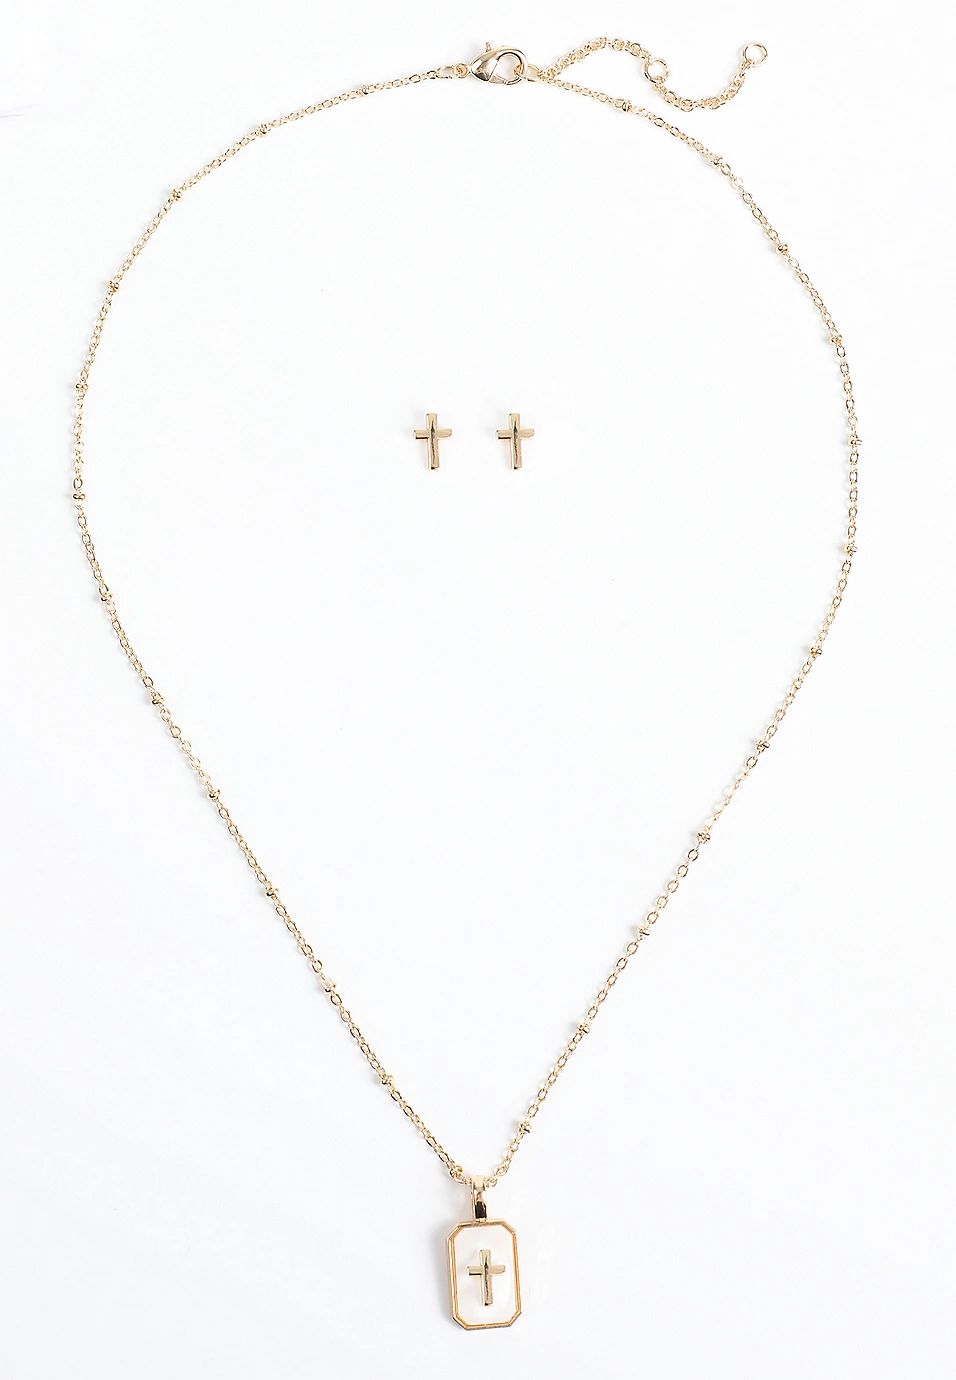 2 Piece Gold Cross Necklace And Earring Set | Maurices